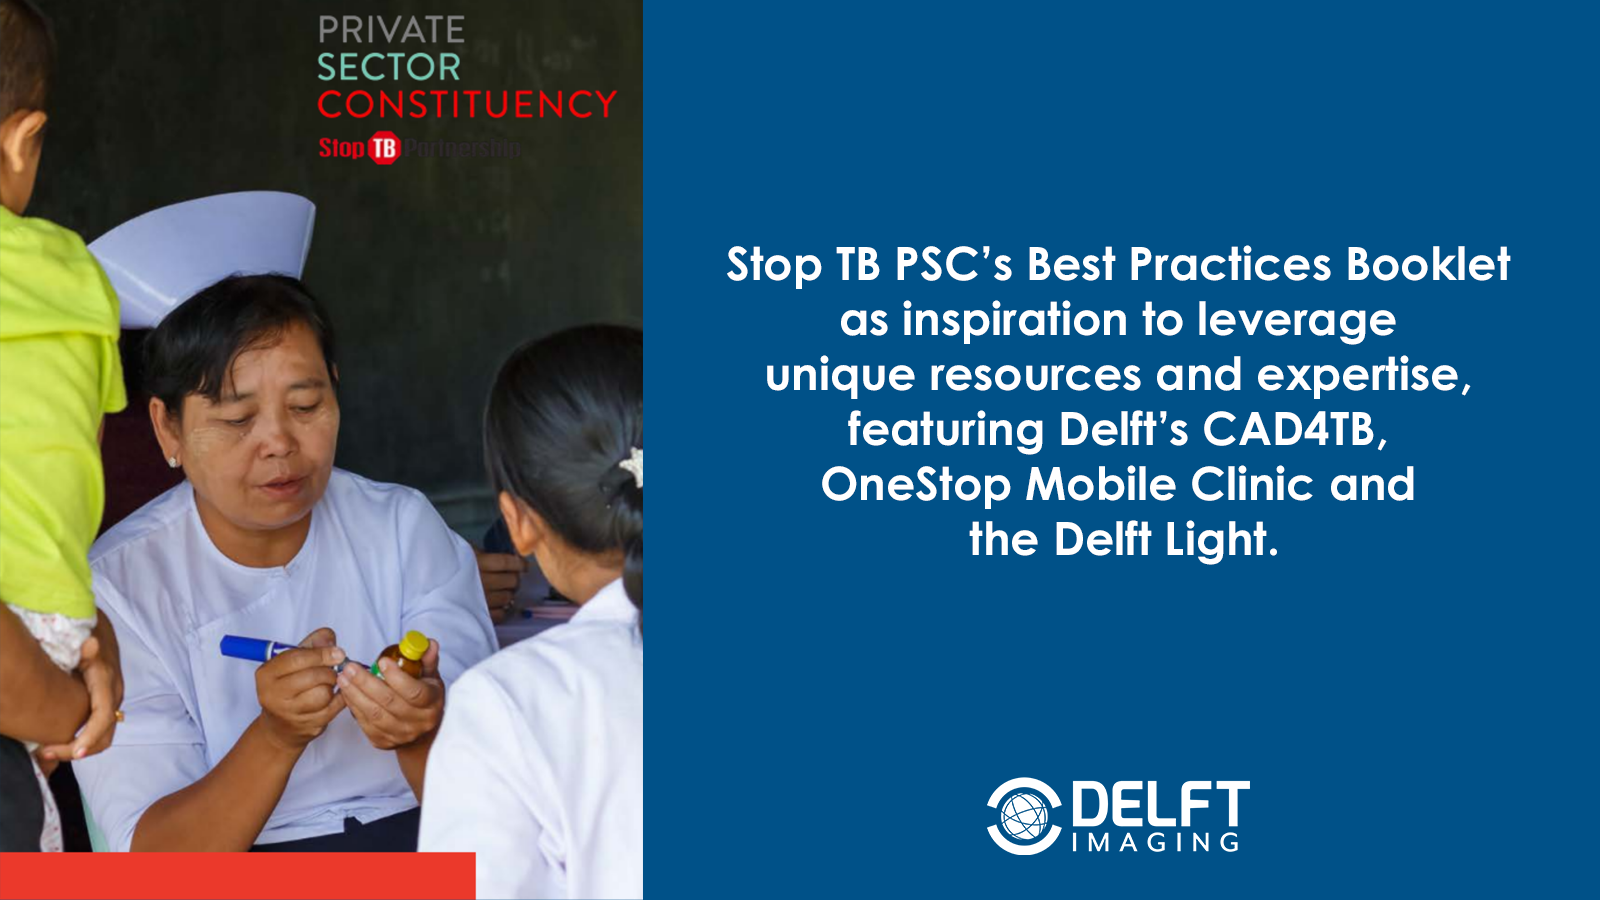 Stop TB PSC’s Best Practices Booklet featuring Delft Solutions